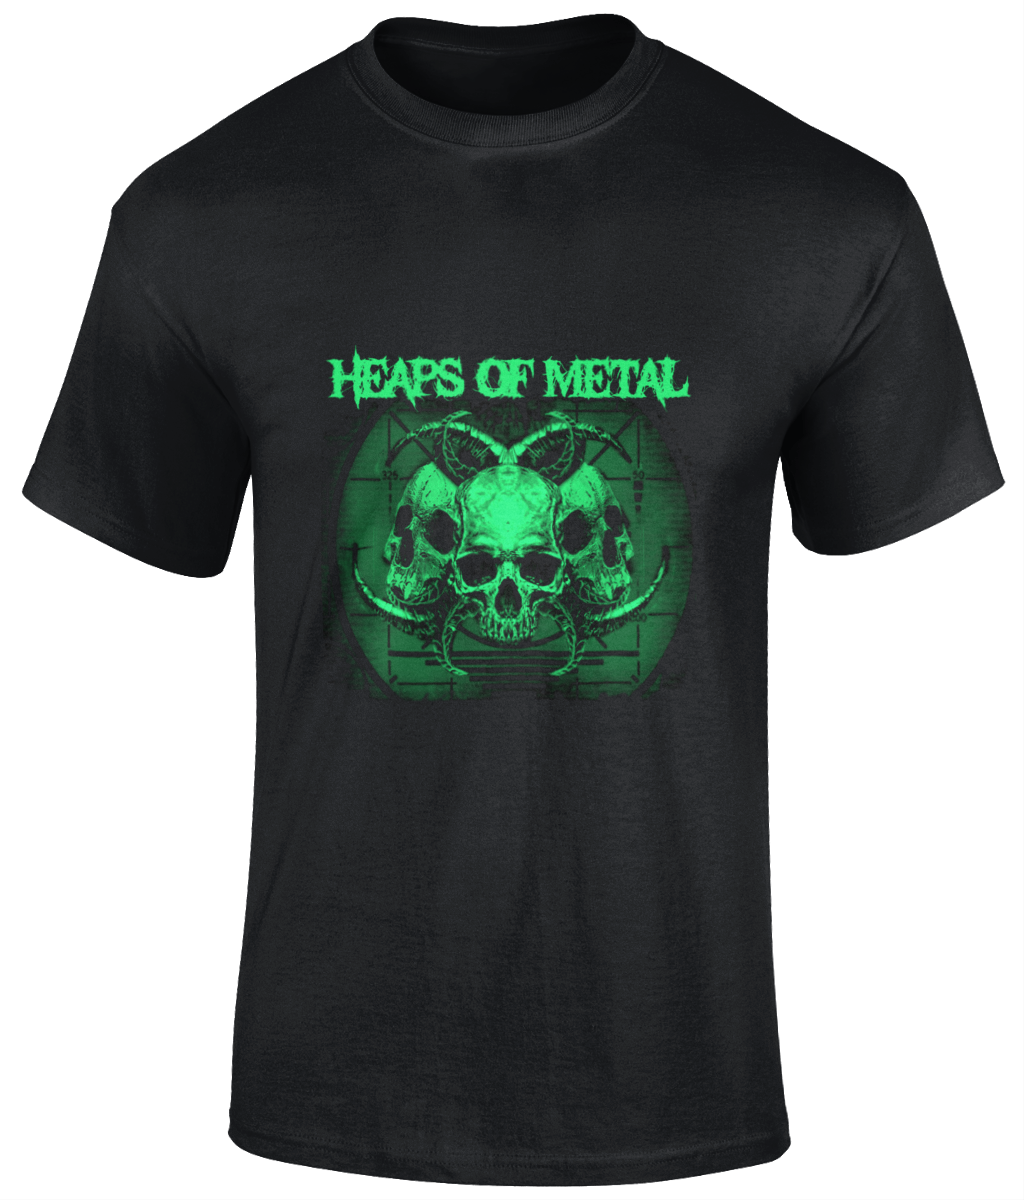 POISON VALLEY CLOTHING "HEAPS OF METAL ARTWORK" in green on black unisex t shirt  Material: 100% cotton.  Seamless twin needle collar. Taped neck and shoulders. Tubular body. Twin needle sleeves and hem. Sizes small to 5XL